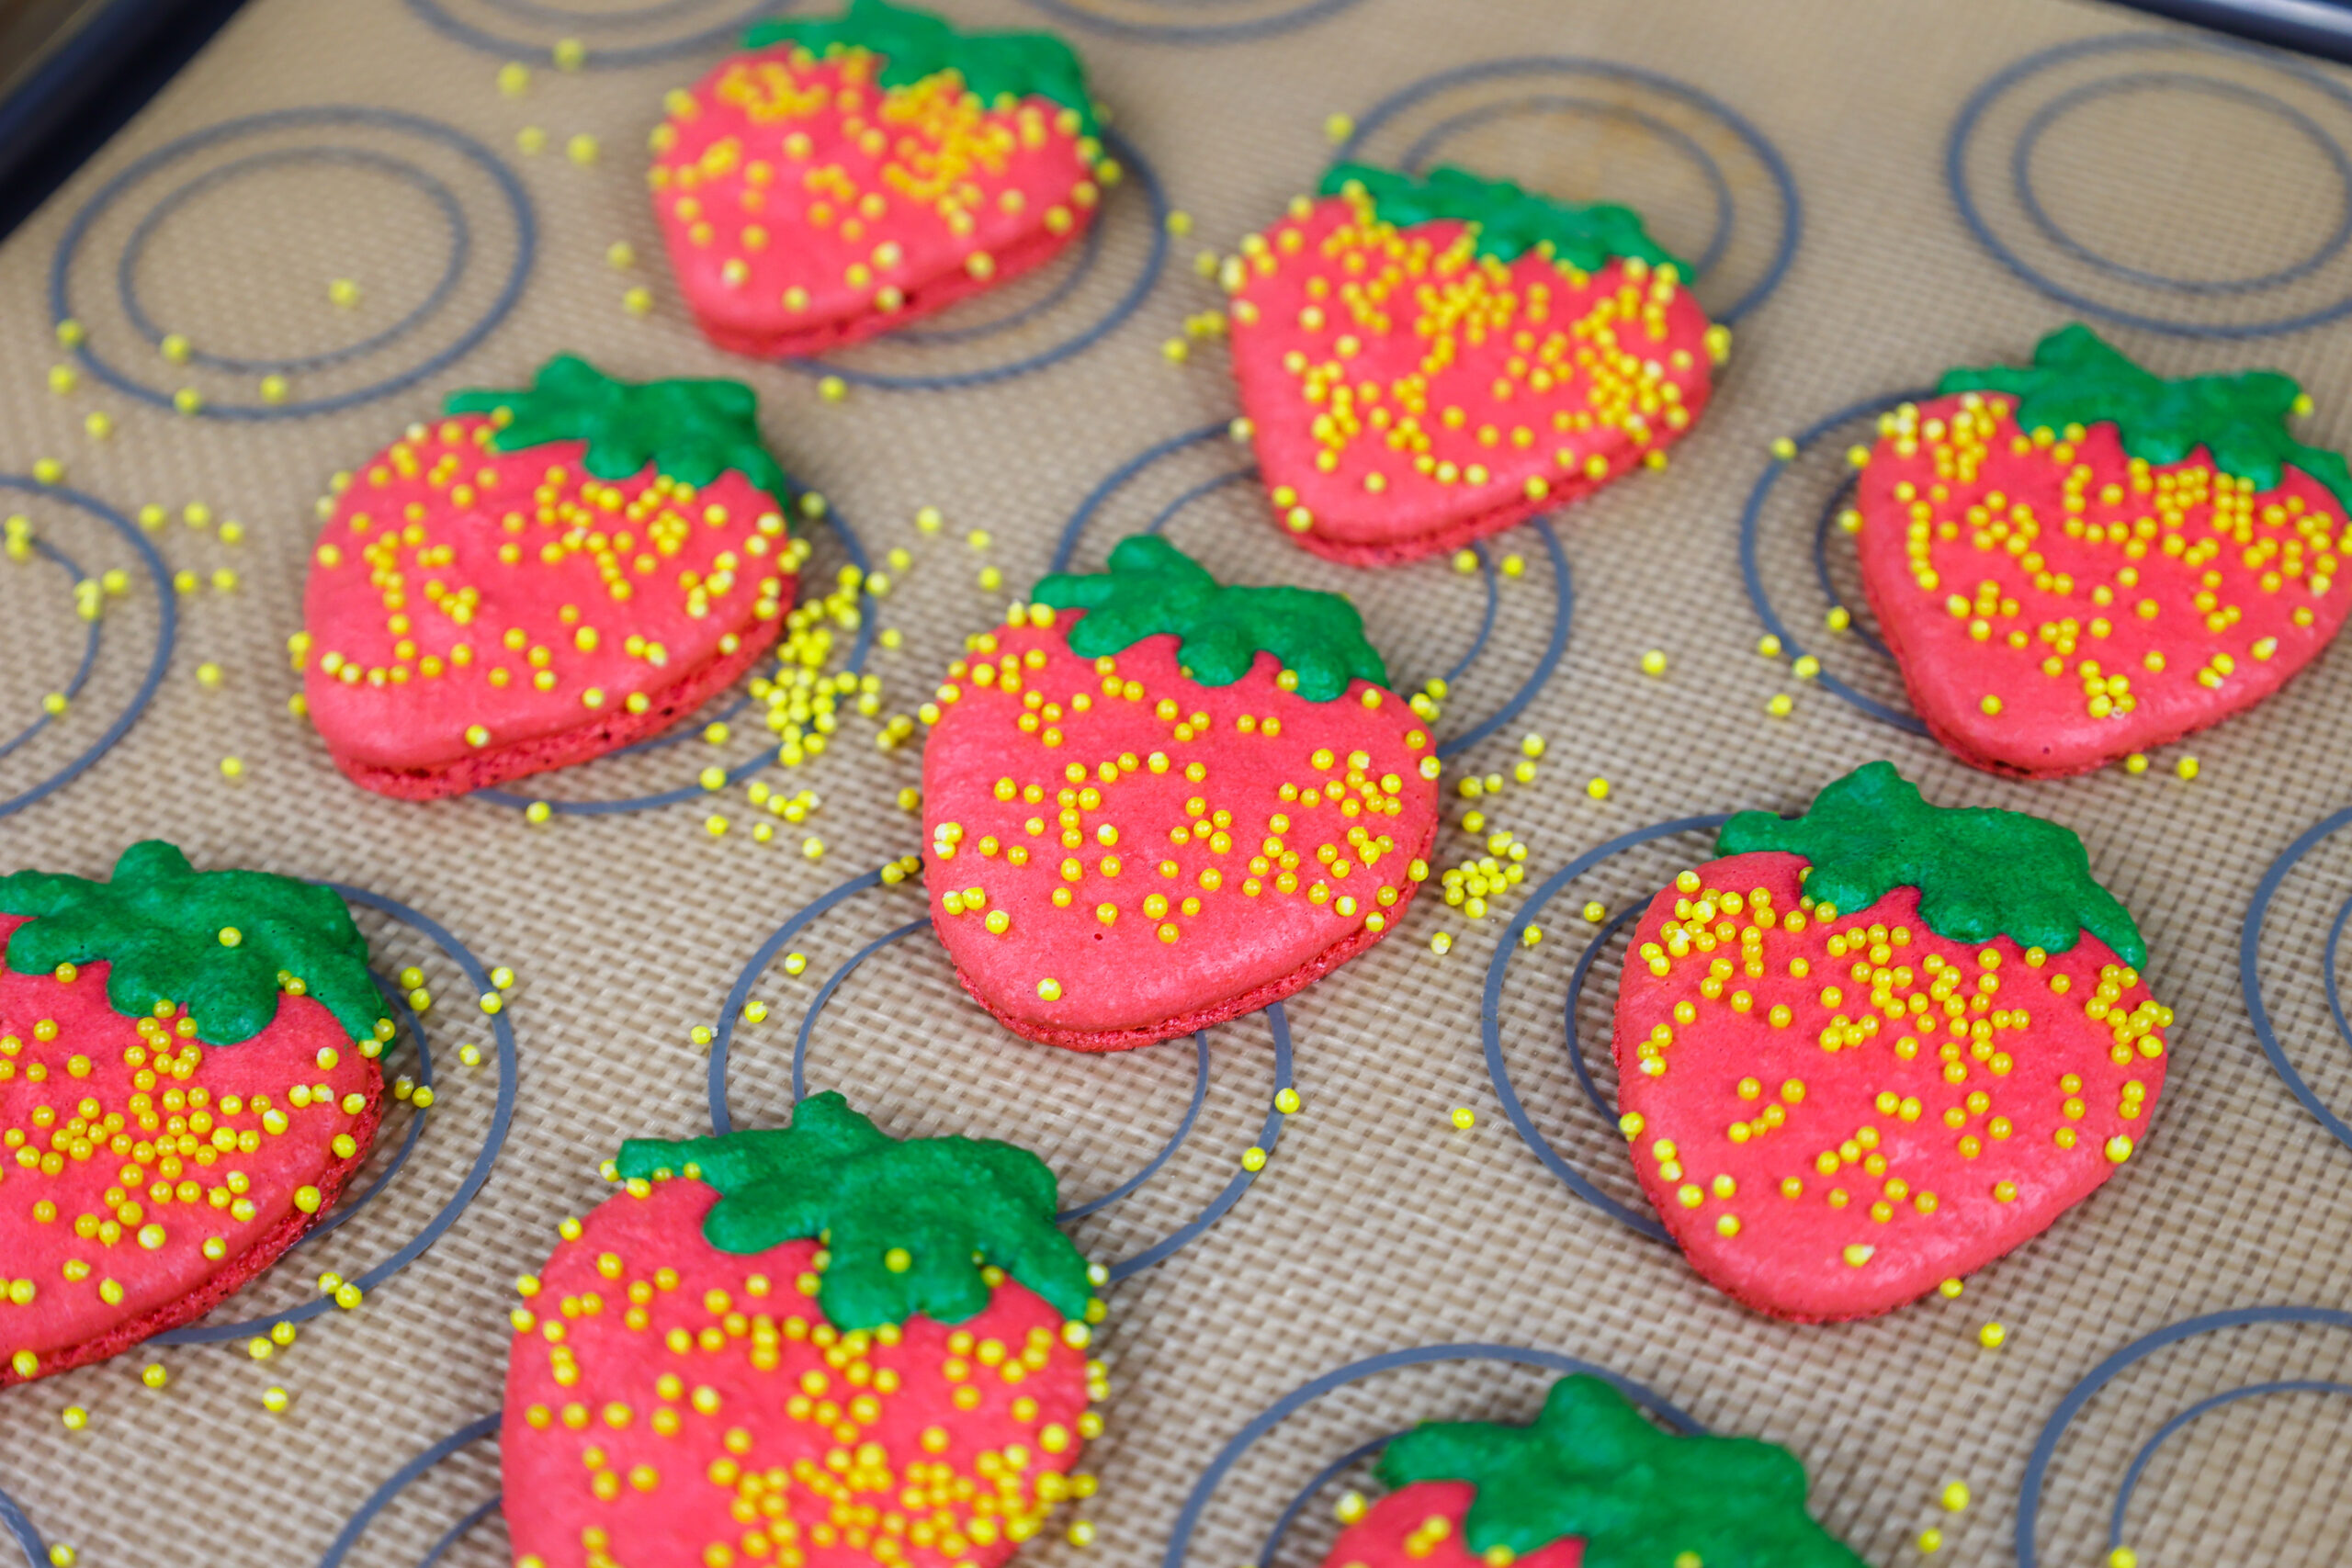 image of strawberry shaped macaron shells that have been baked and have nice feet